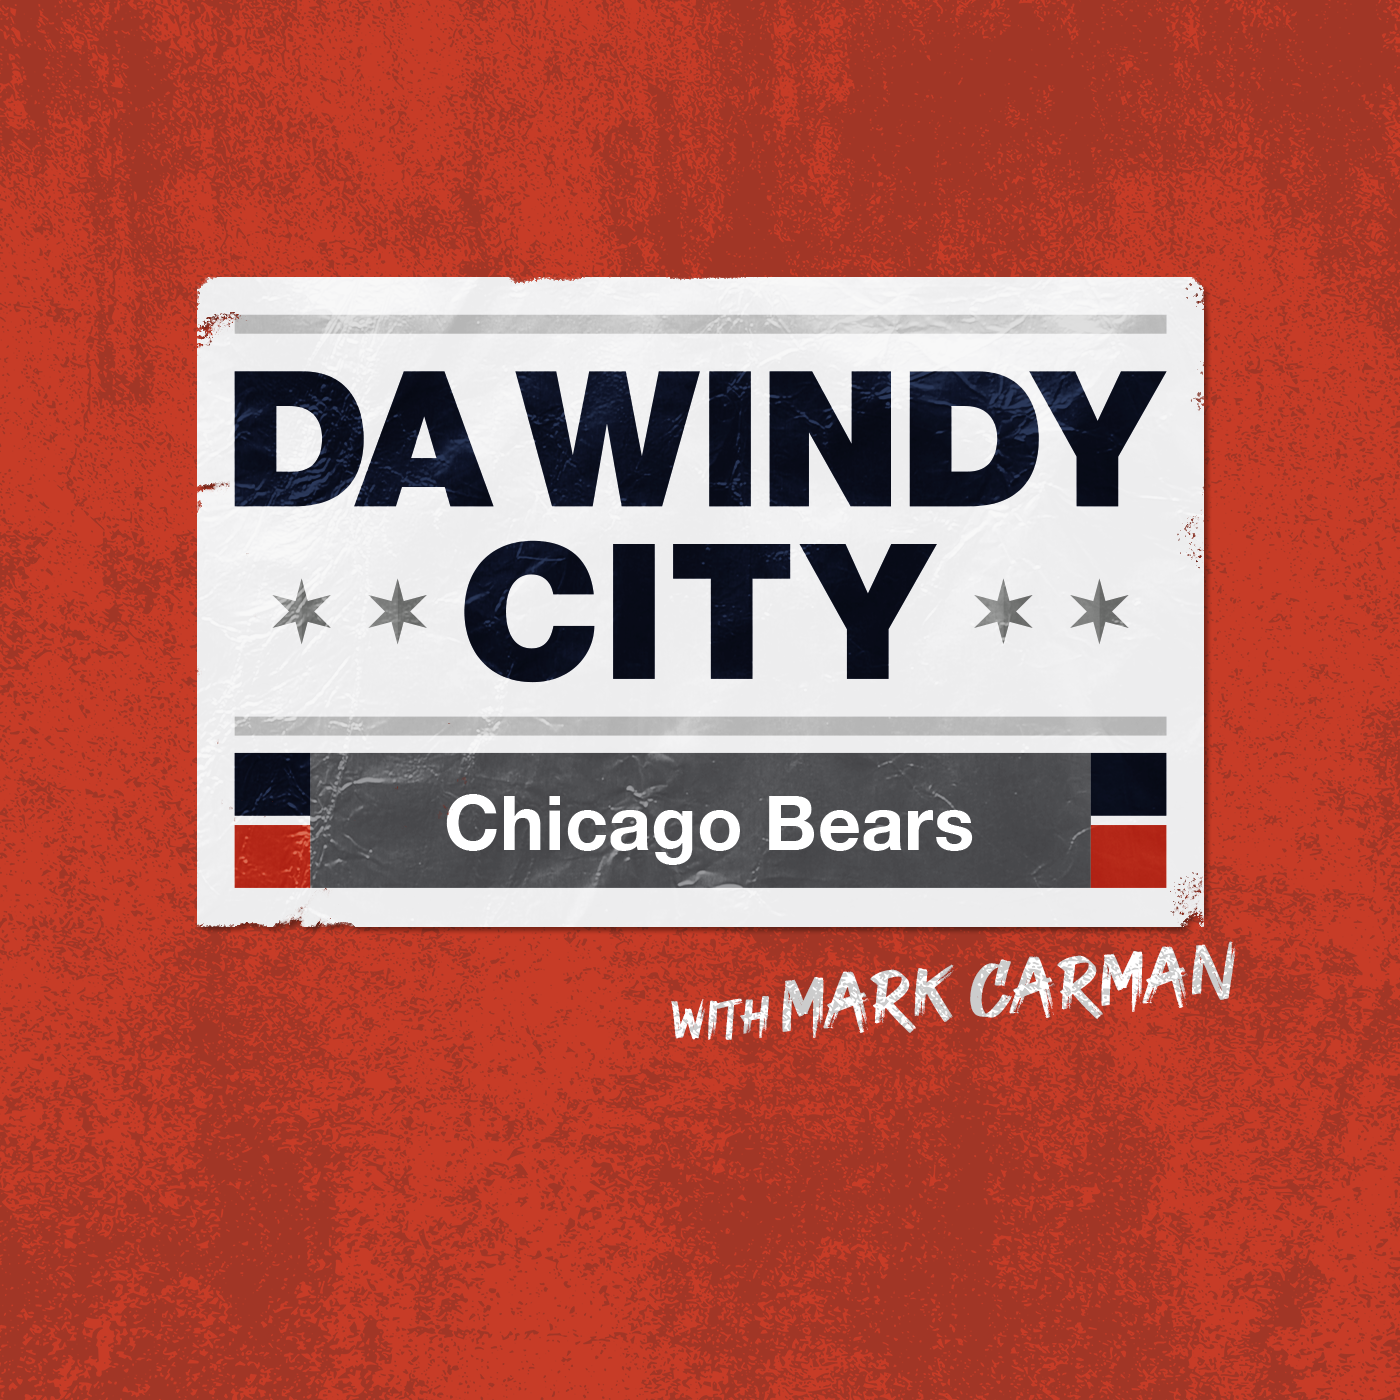 NBC's Mike Berman talks Bears playoffs plus the future of Pace Nagy and Mitch